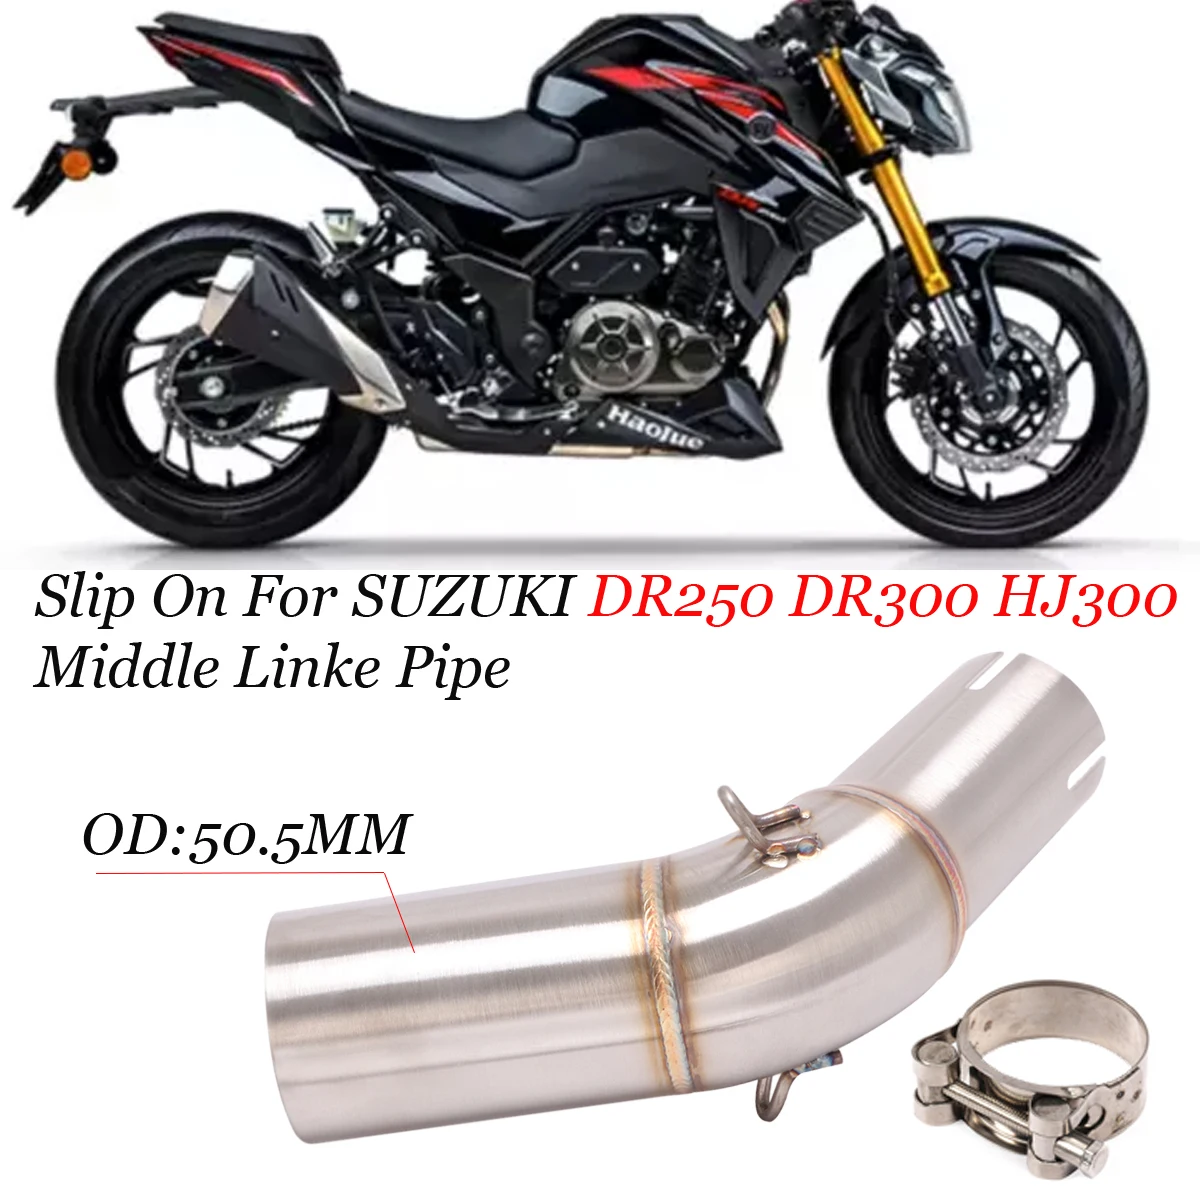 

Motorcycle Exhaust Slip On For SUZUKI DR250 DR300 DR 300 HJ300 Escape Modified Middle Tube Link Pipe Connection 51mm Muffler